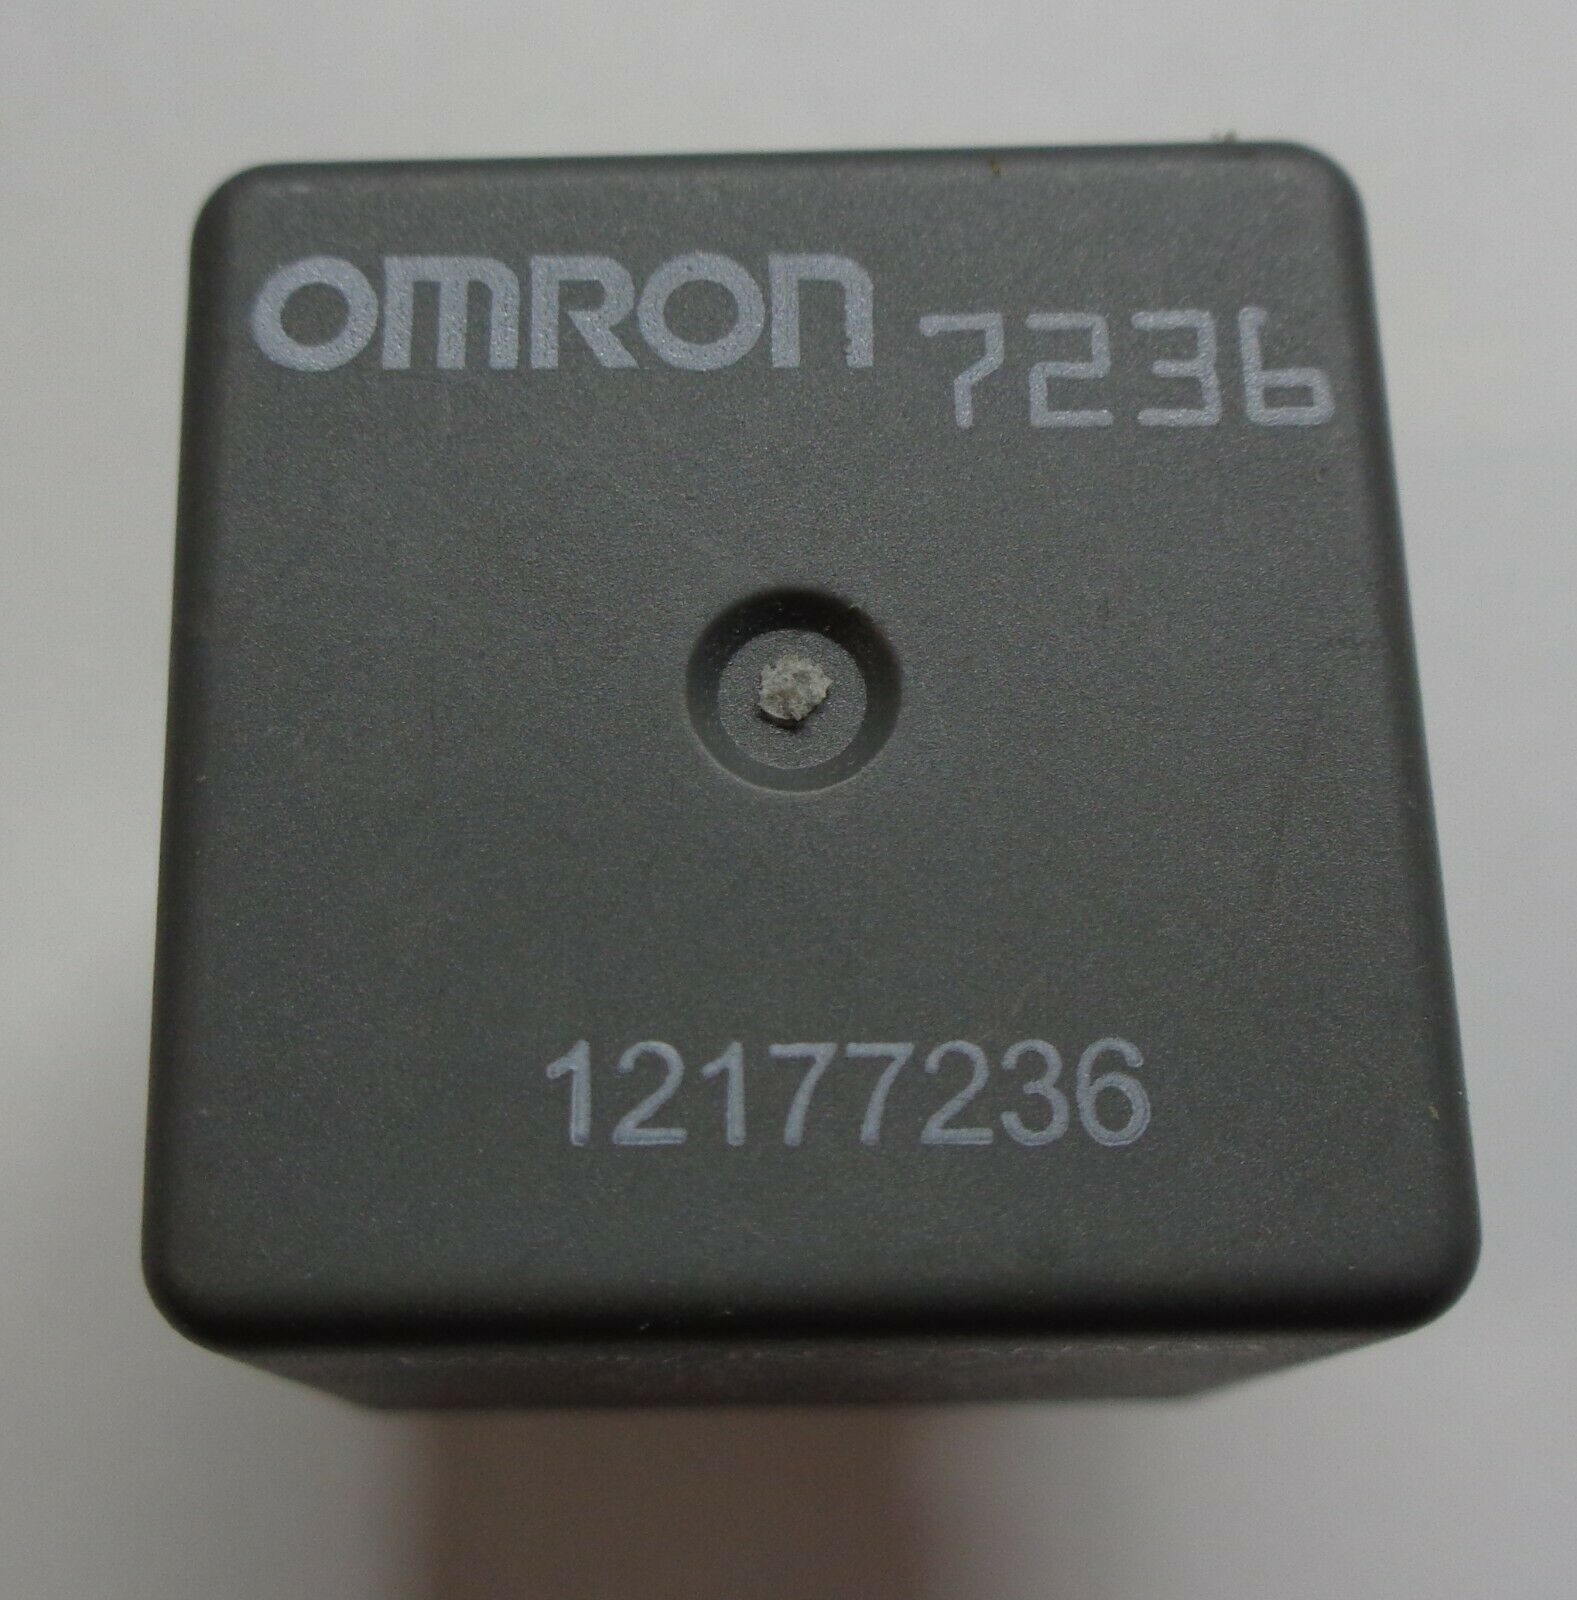 Primary image for USA SELLER GM OMRON RELAY 12177236 TESTED 1 YEAR WARRANTY FREE SHIPPING GM9